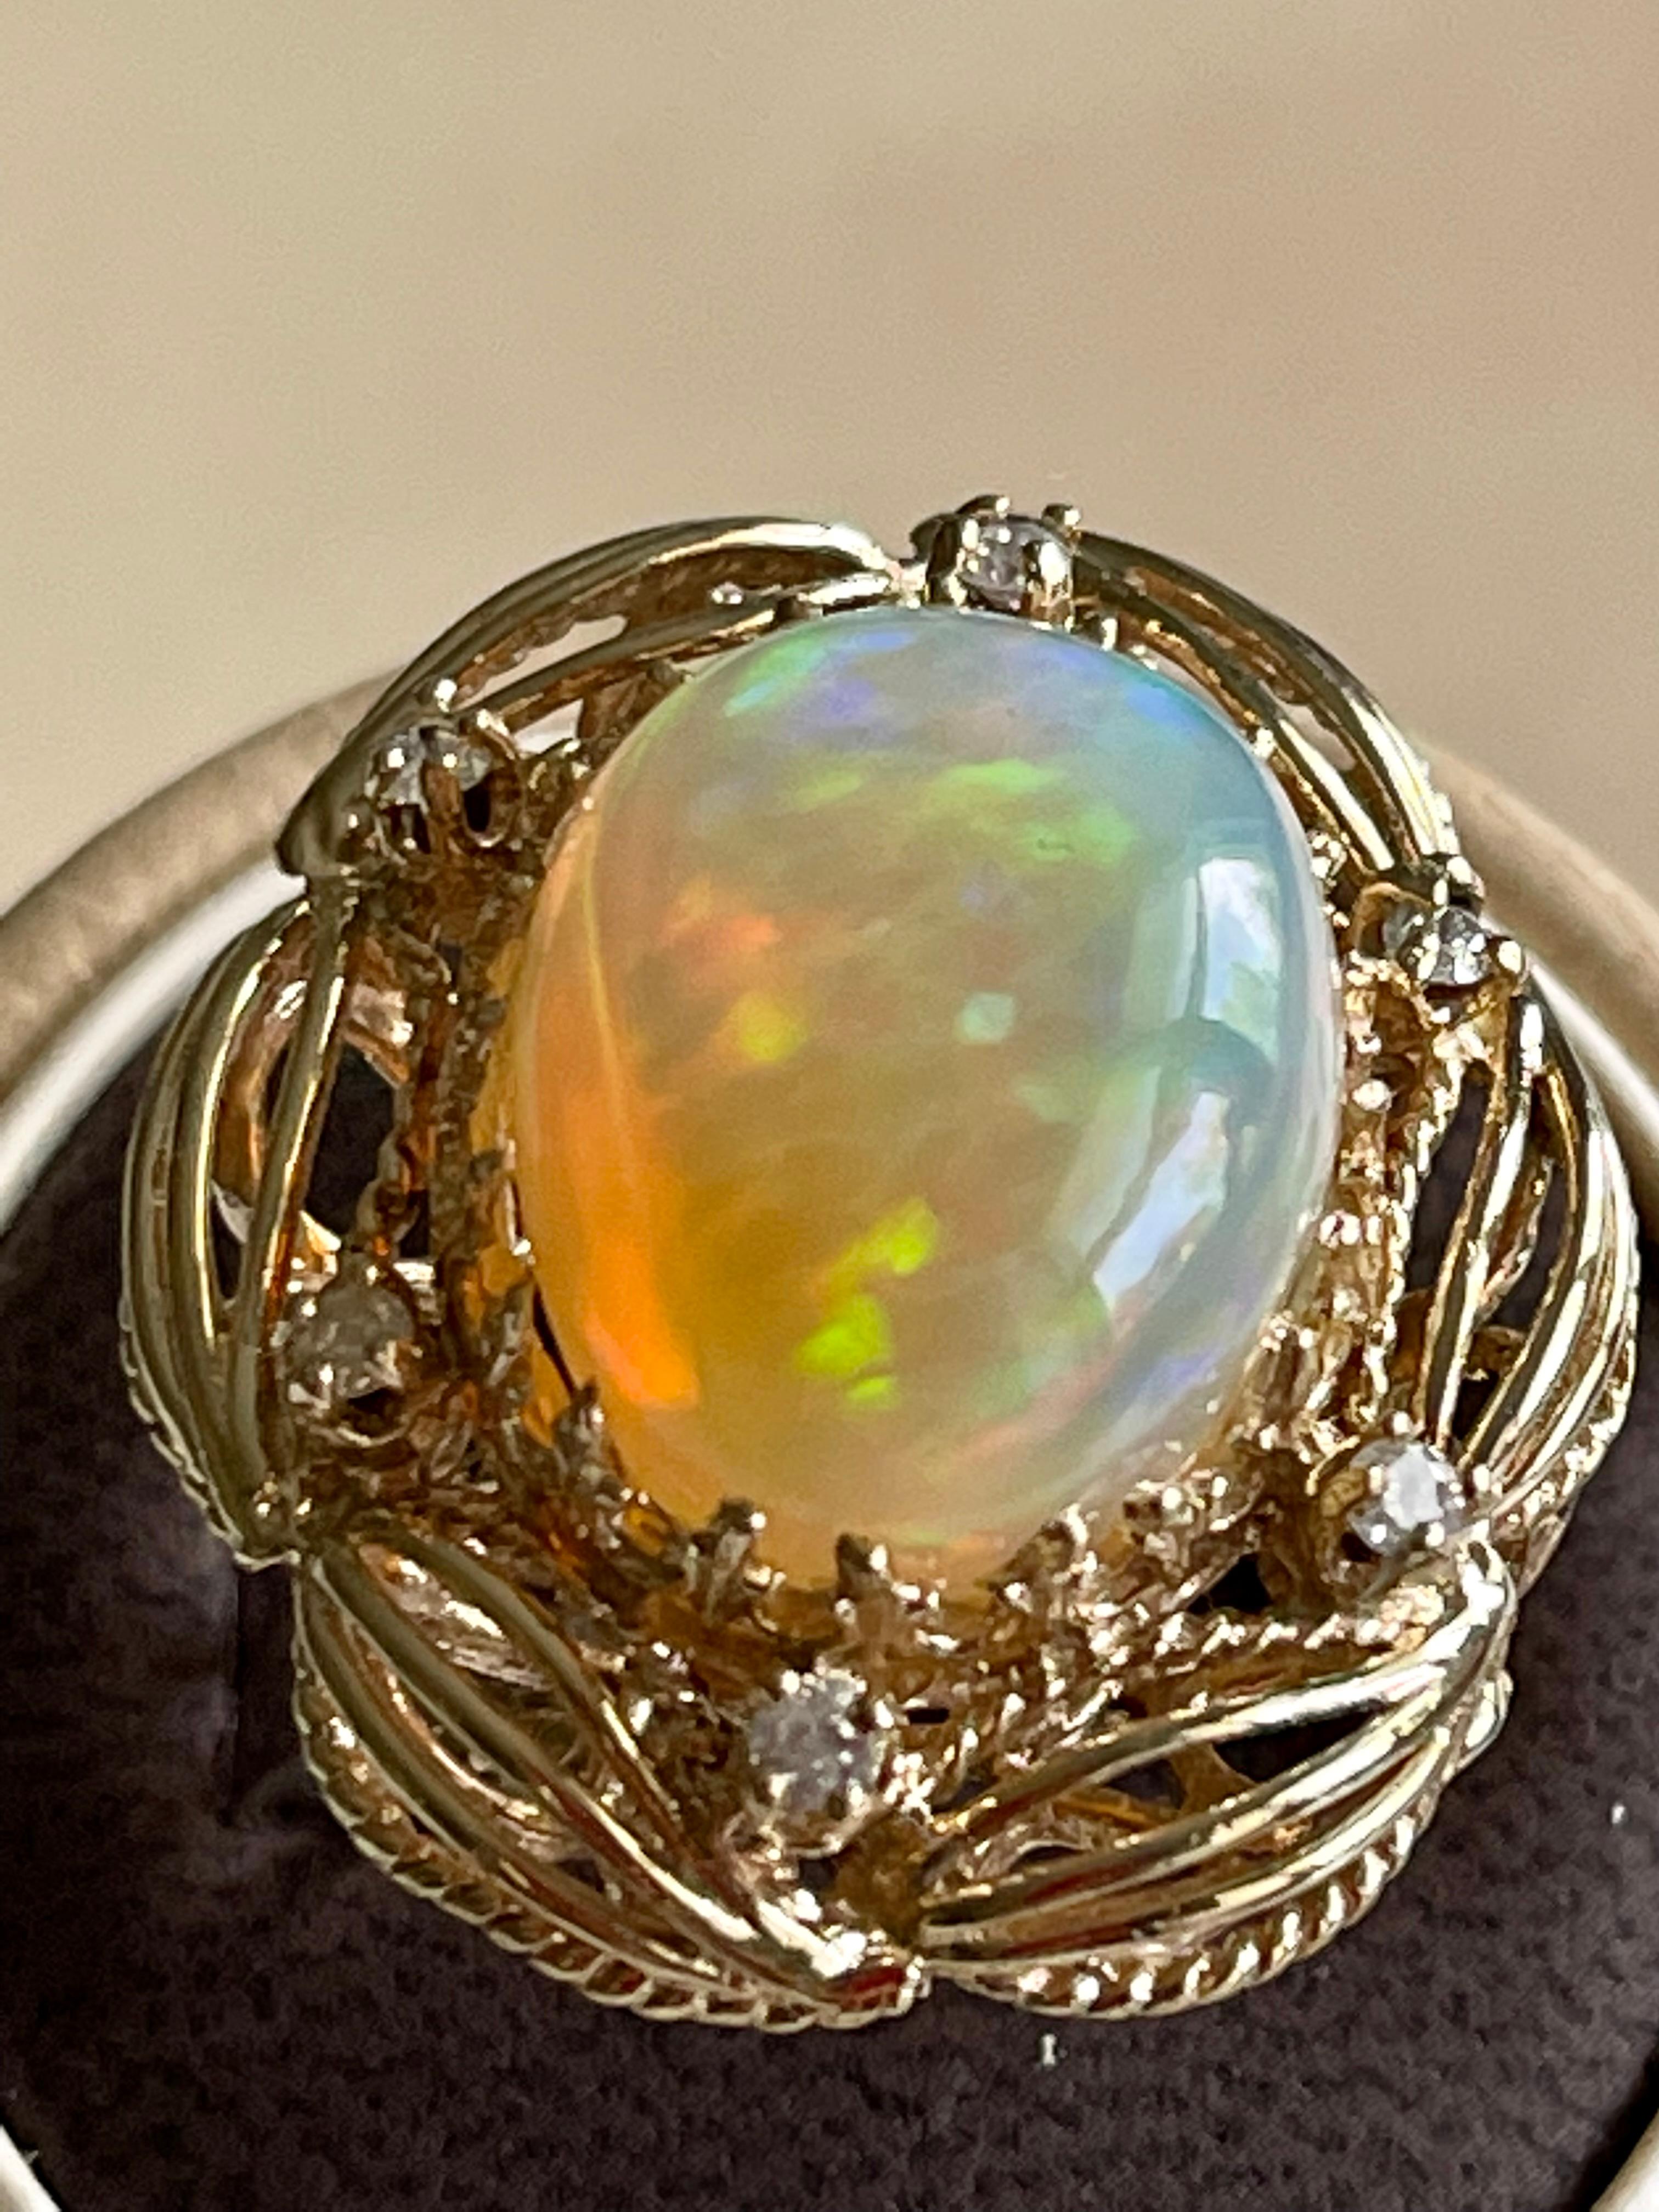 15 Carat Oval Shape Ethiopian Opal Cocktail Ring 14 Karat Yellow Gold Solid Ring 6